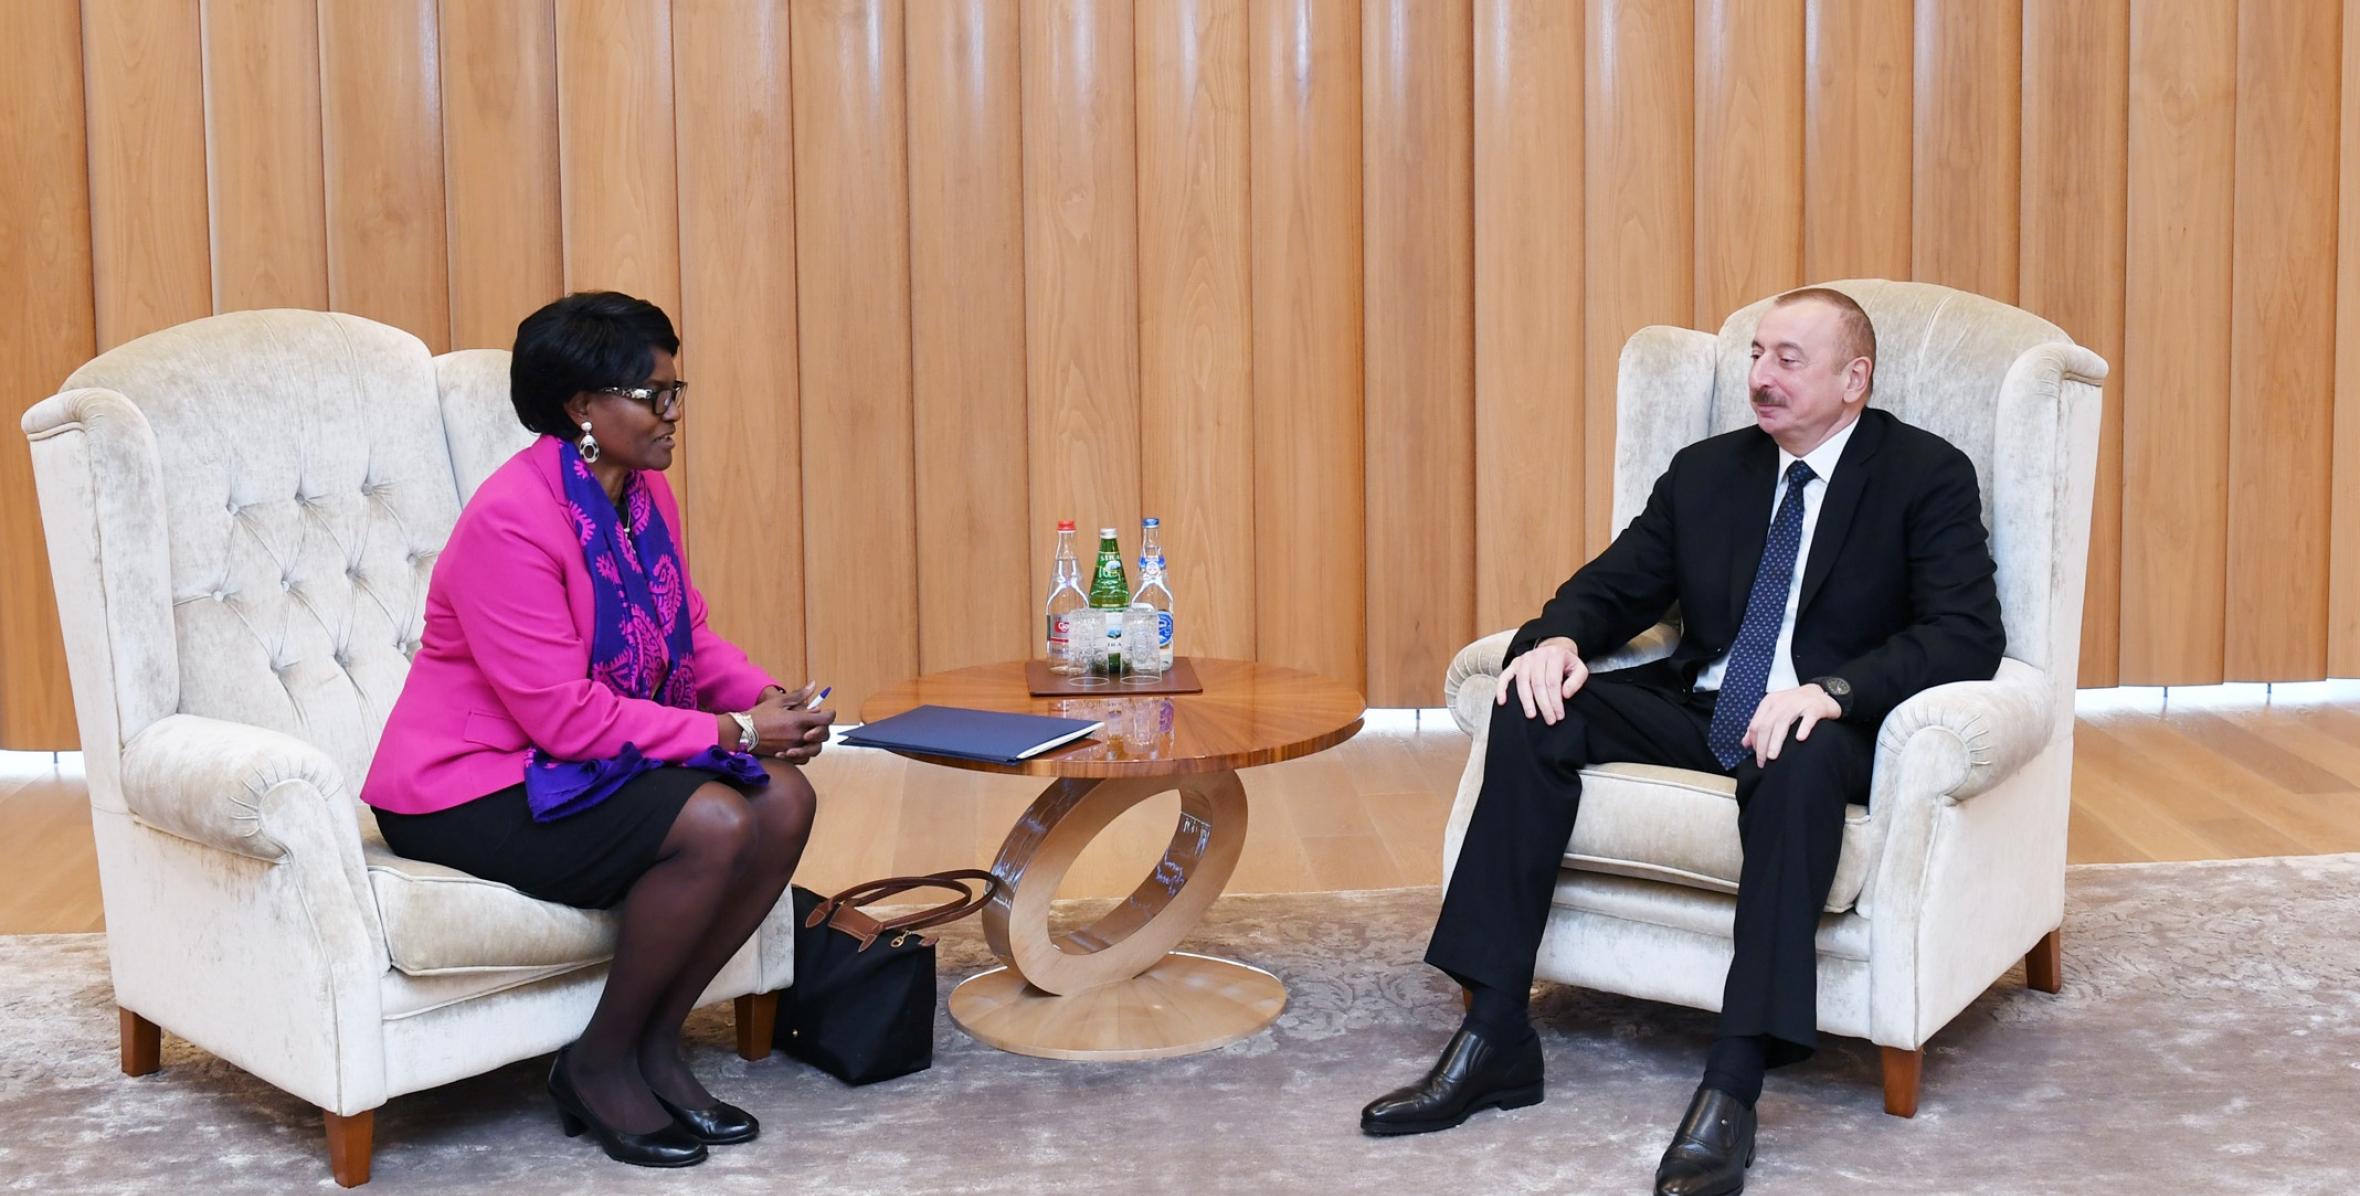 Ilham Aliyev met with World Bank Regional Director for South Caucasus